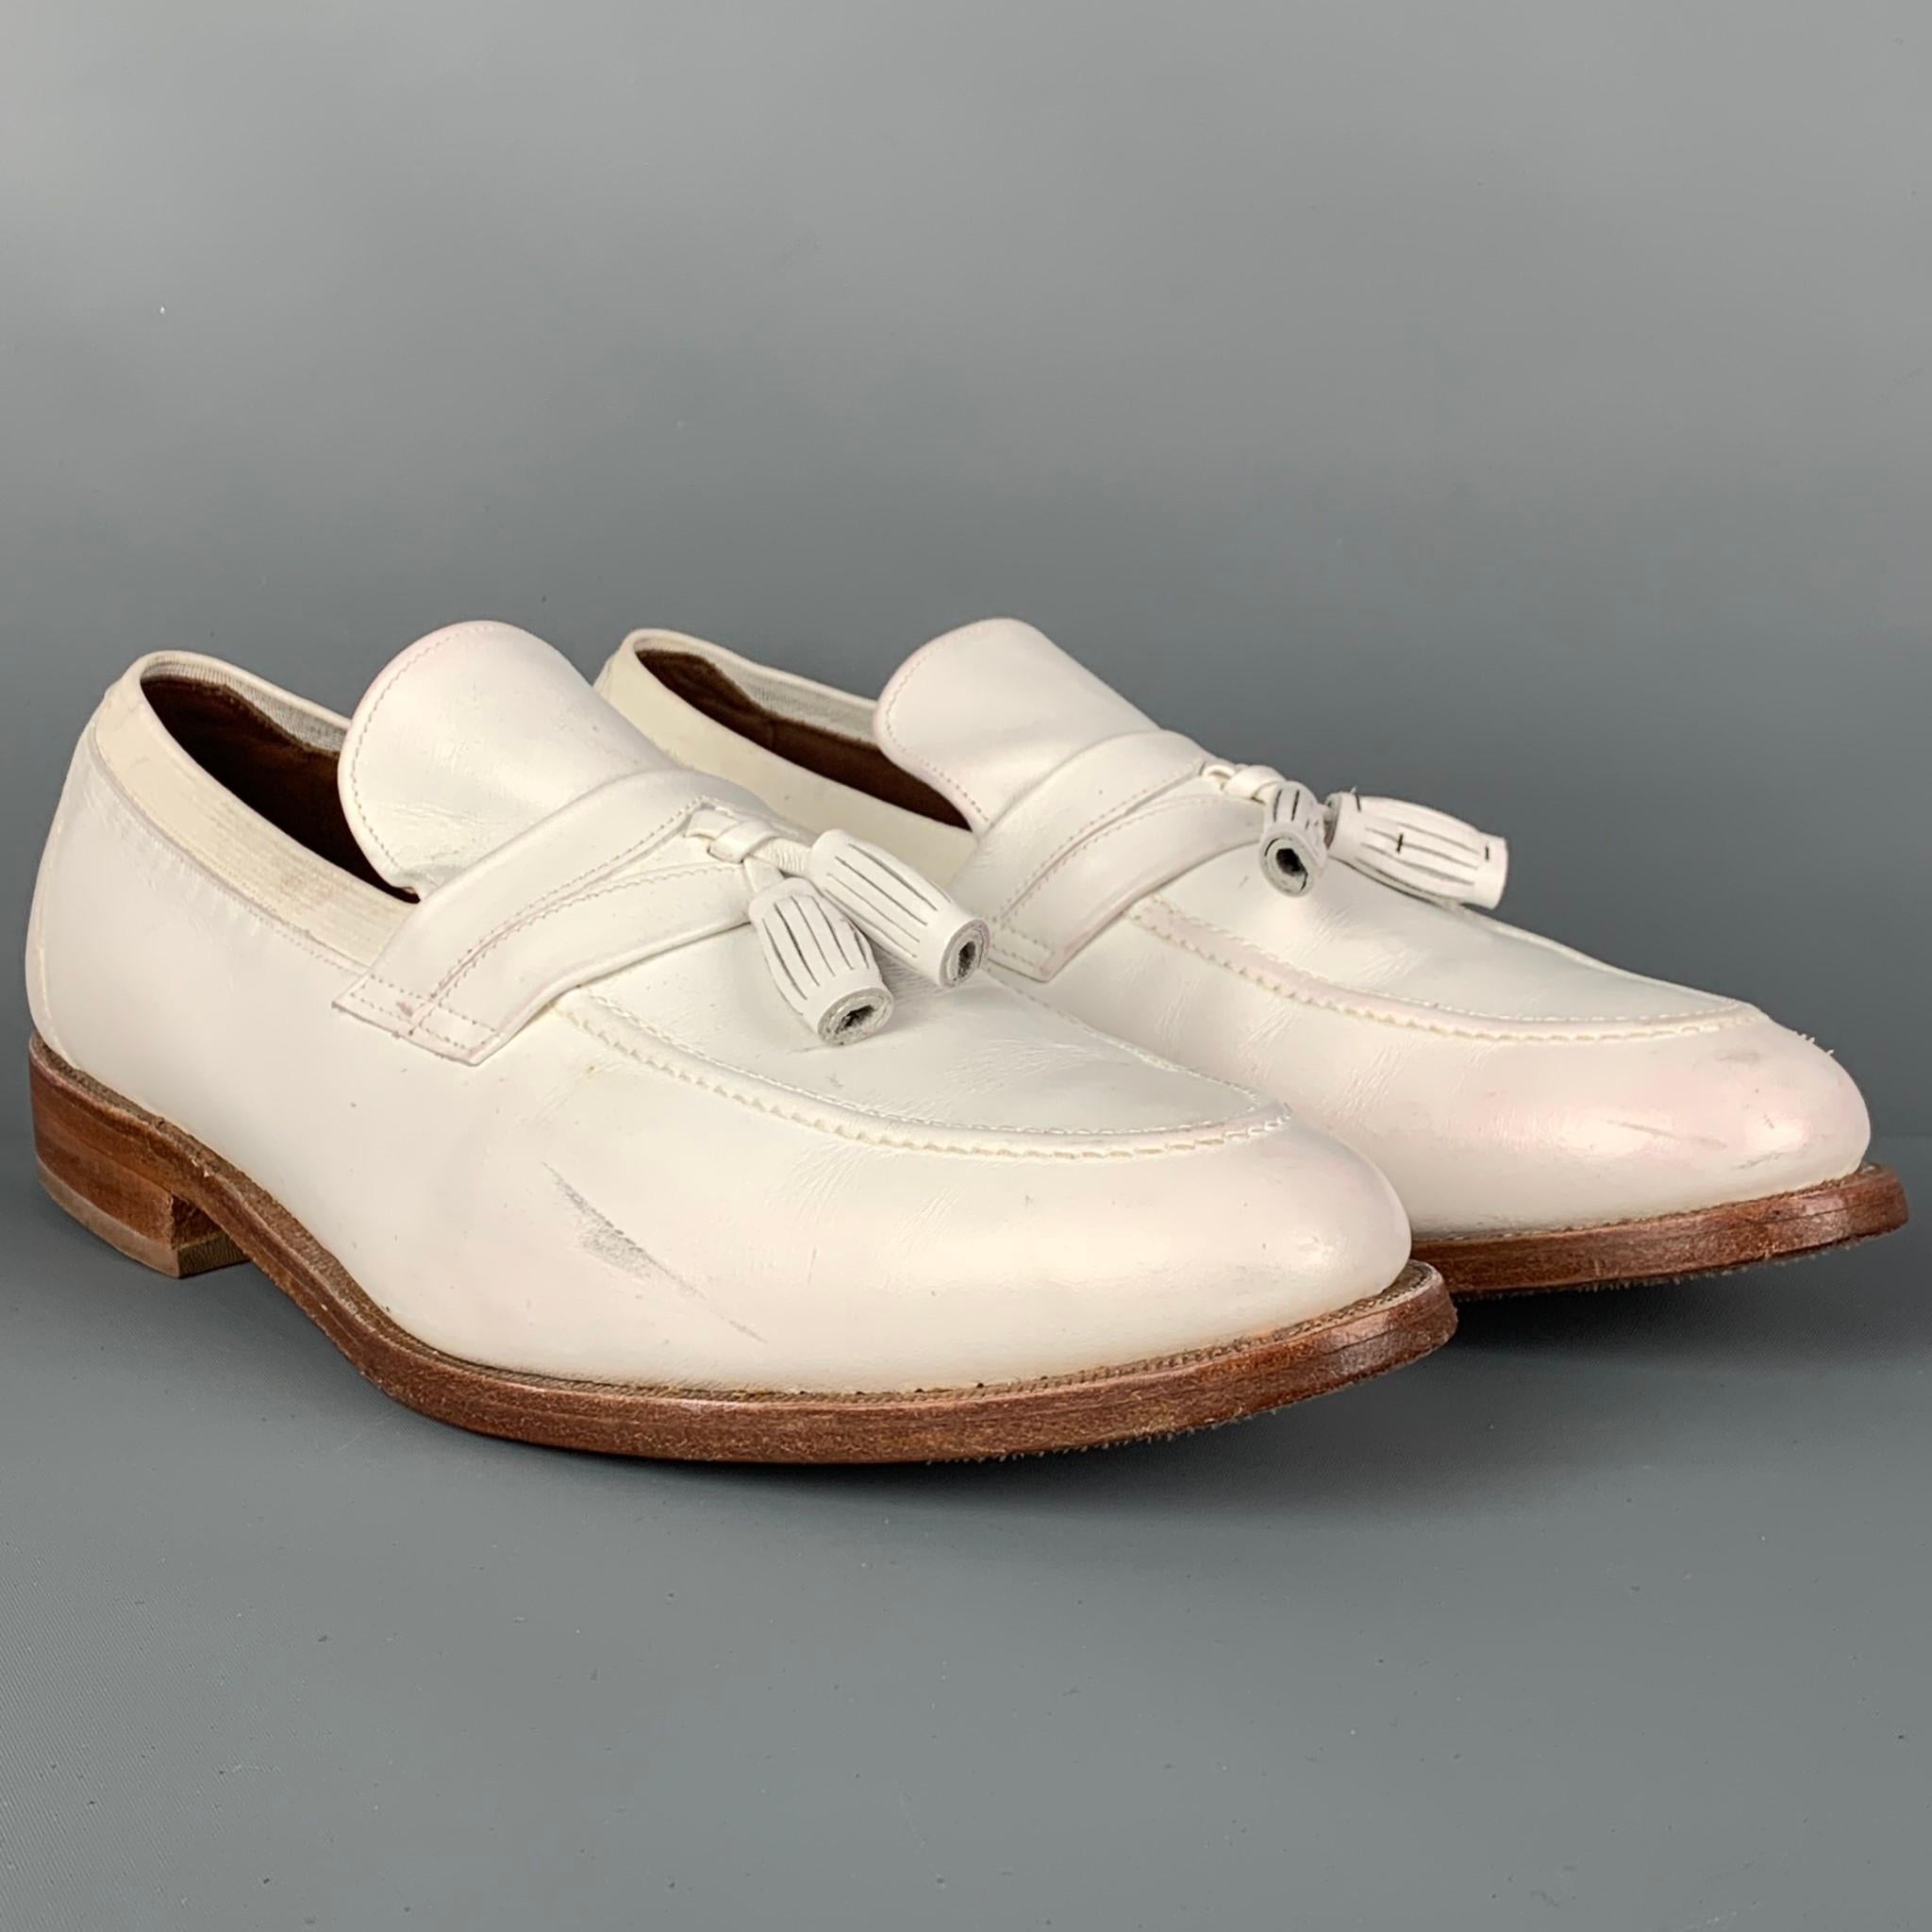 ALLEN EDMONDS loafers comes in a white leather featuring front tassels and a slip on style. Made in USA.

Good Pre-Owned Condition. Moderate wear throughout.
Marked: 10.5 / 30641 4

Outsole: 12.5 in. x 4.5 in. 